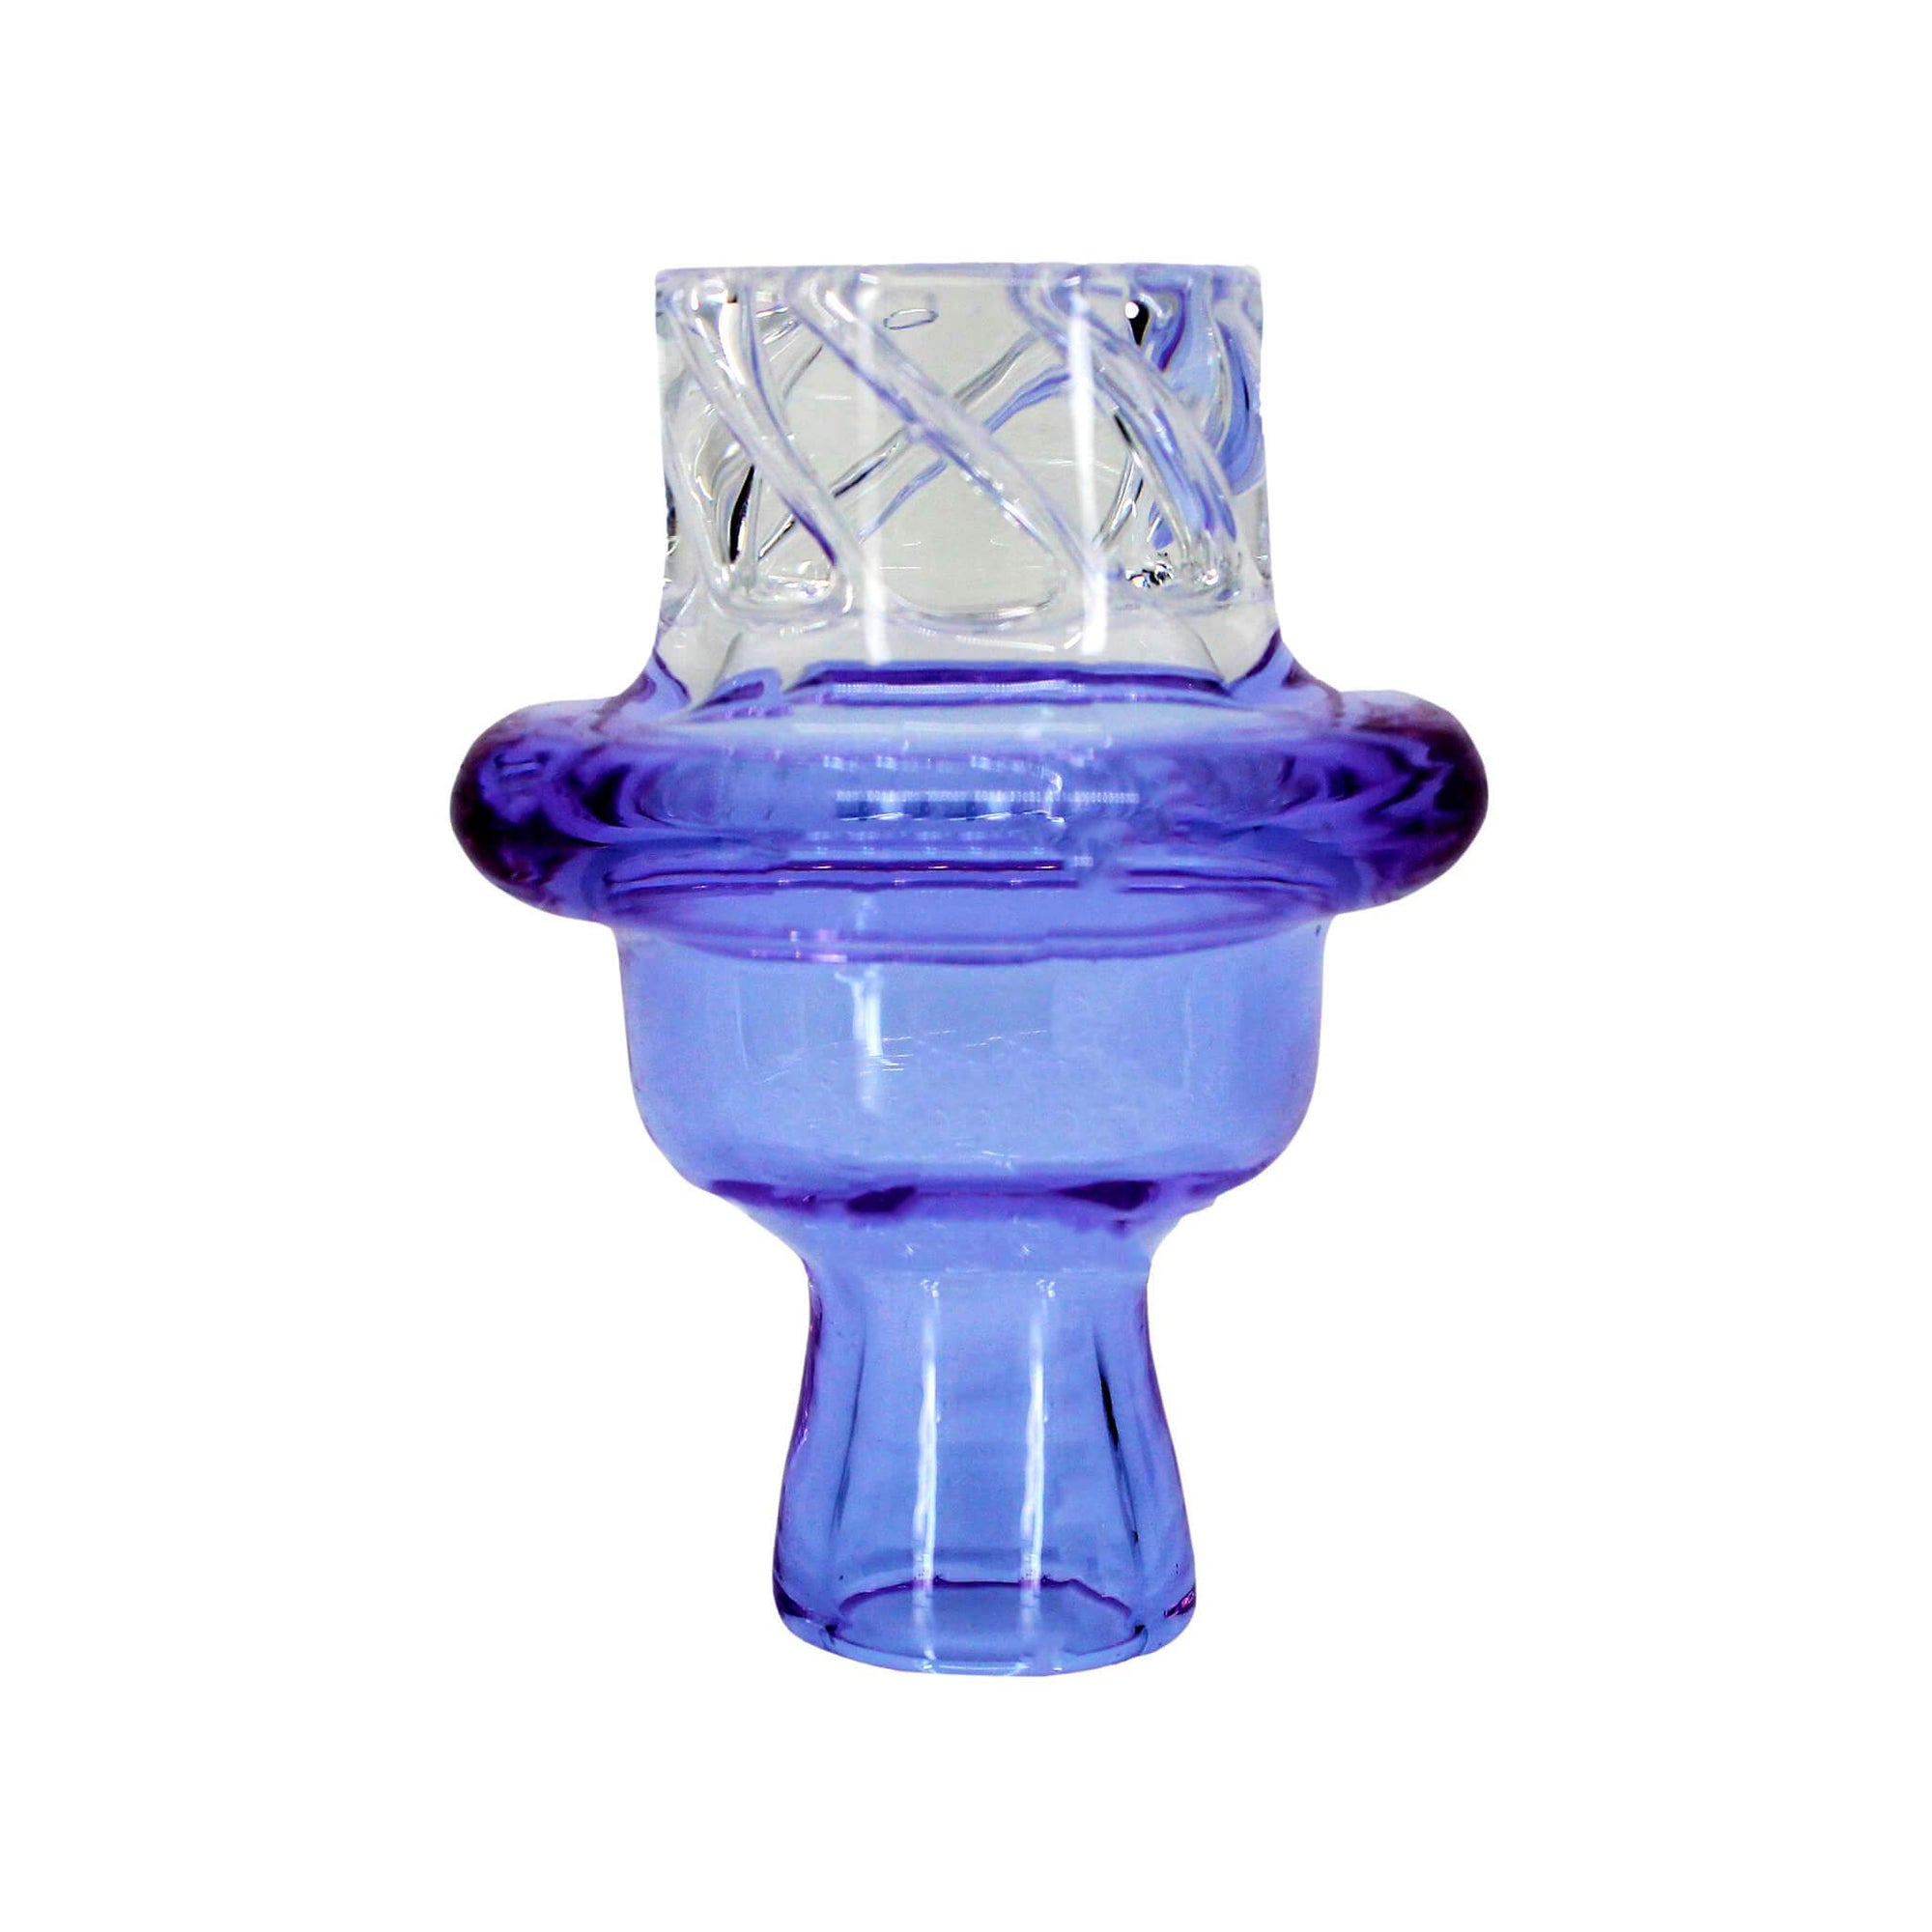 Cyclone Spinner Carb Cap | Blue Upside Down View | the dabbing specialists